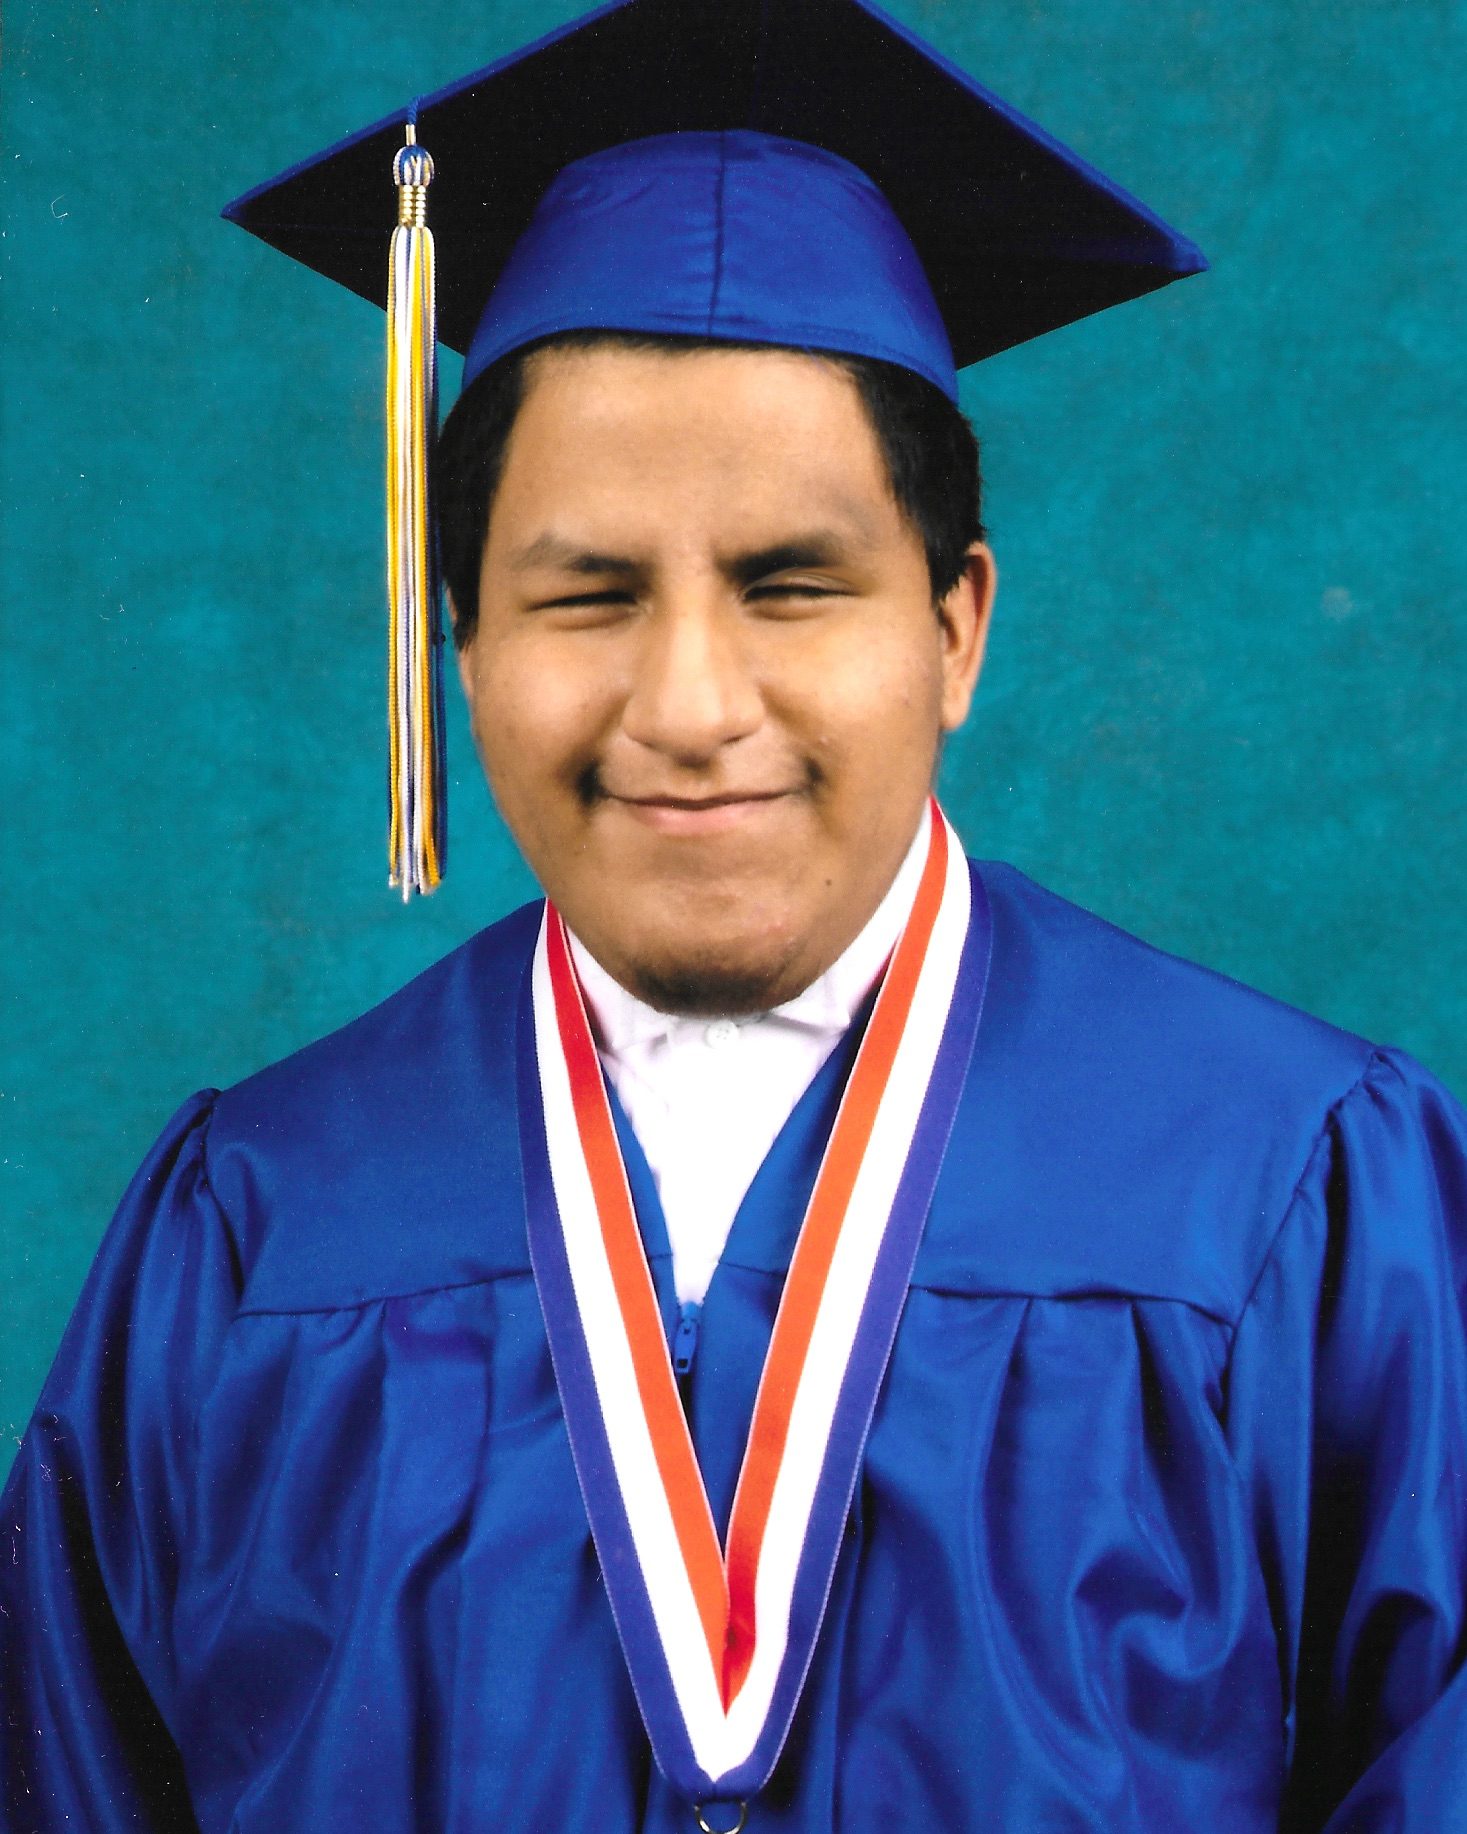 boy wearing blue graduation cap and gown and gold medal